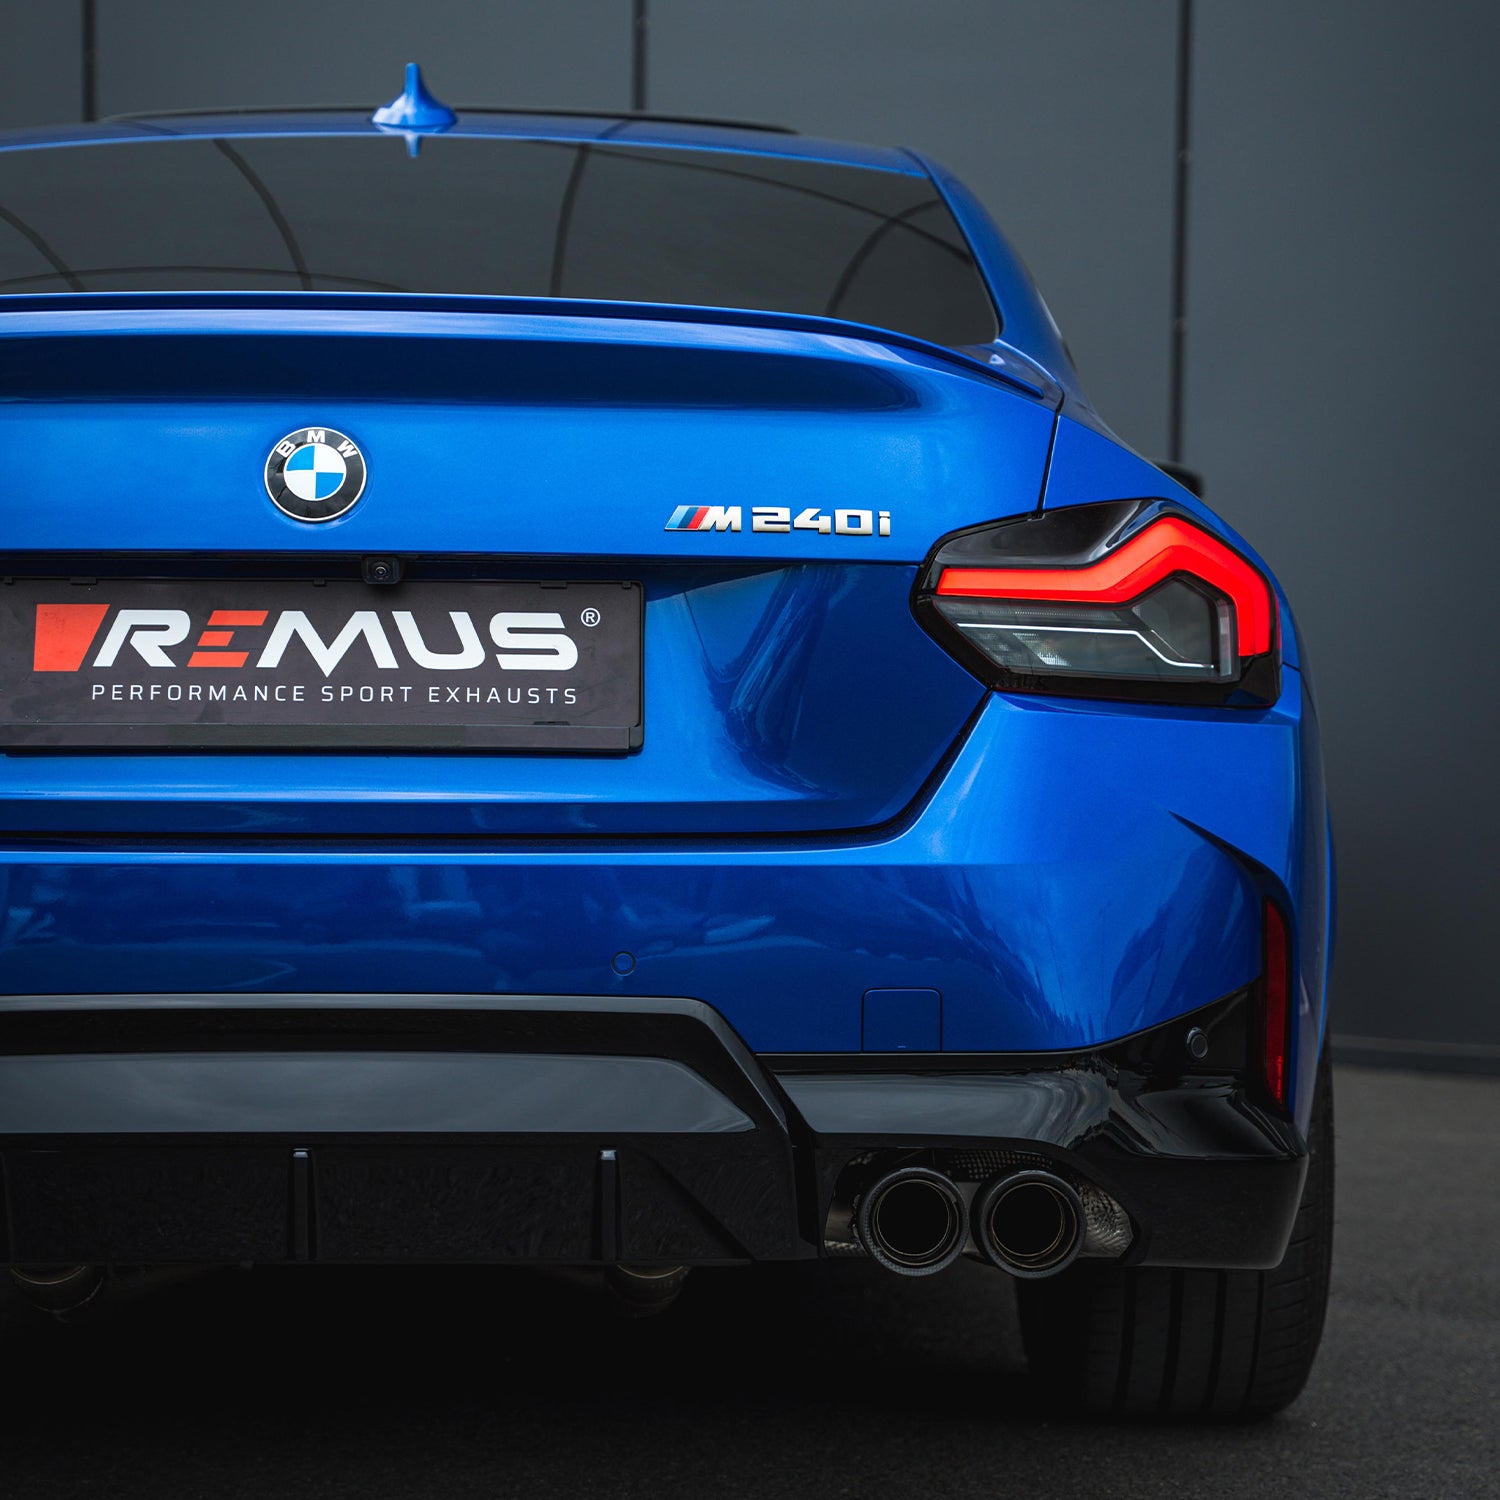 Remus Exhausts BMW G42 M240i Cat Back Exhaust System Fitted To Car